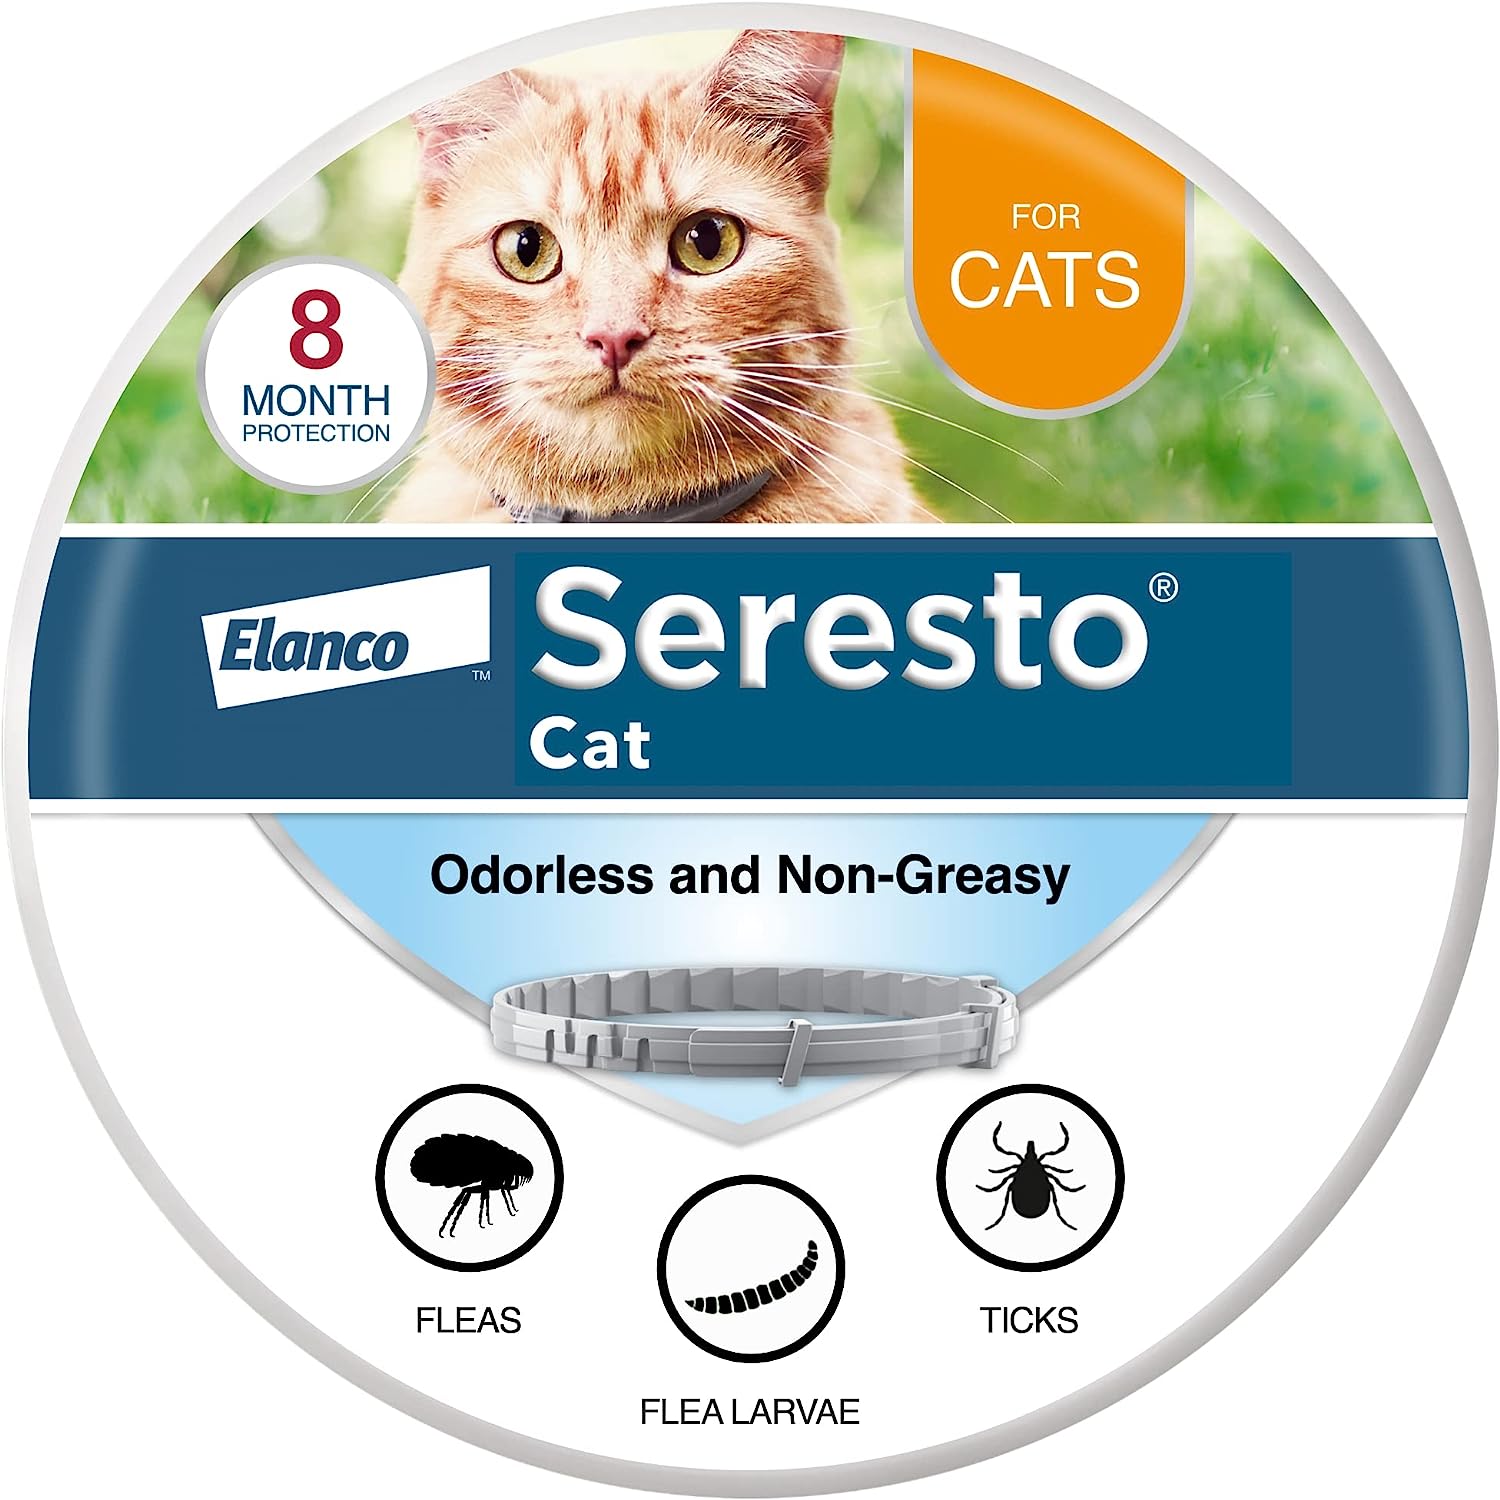 Seresto Cat Vet-Recommended Flea & Tick Treatment & Prevention Collar for Cats|8 Months Protection